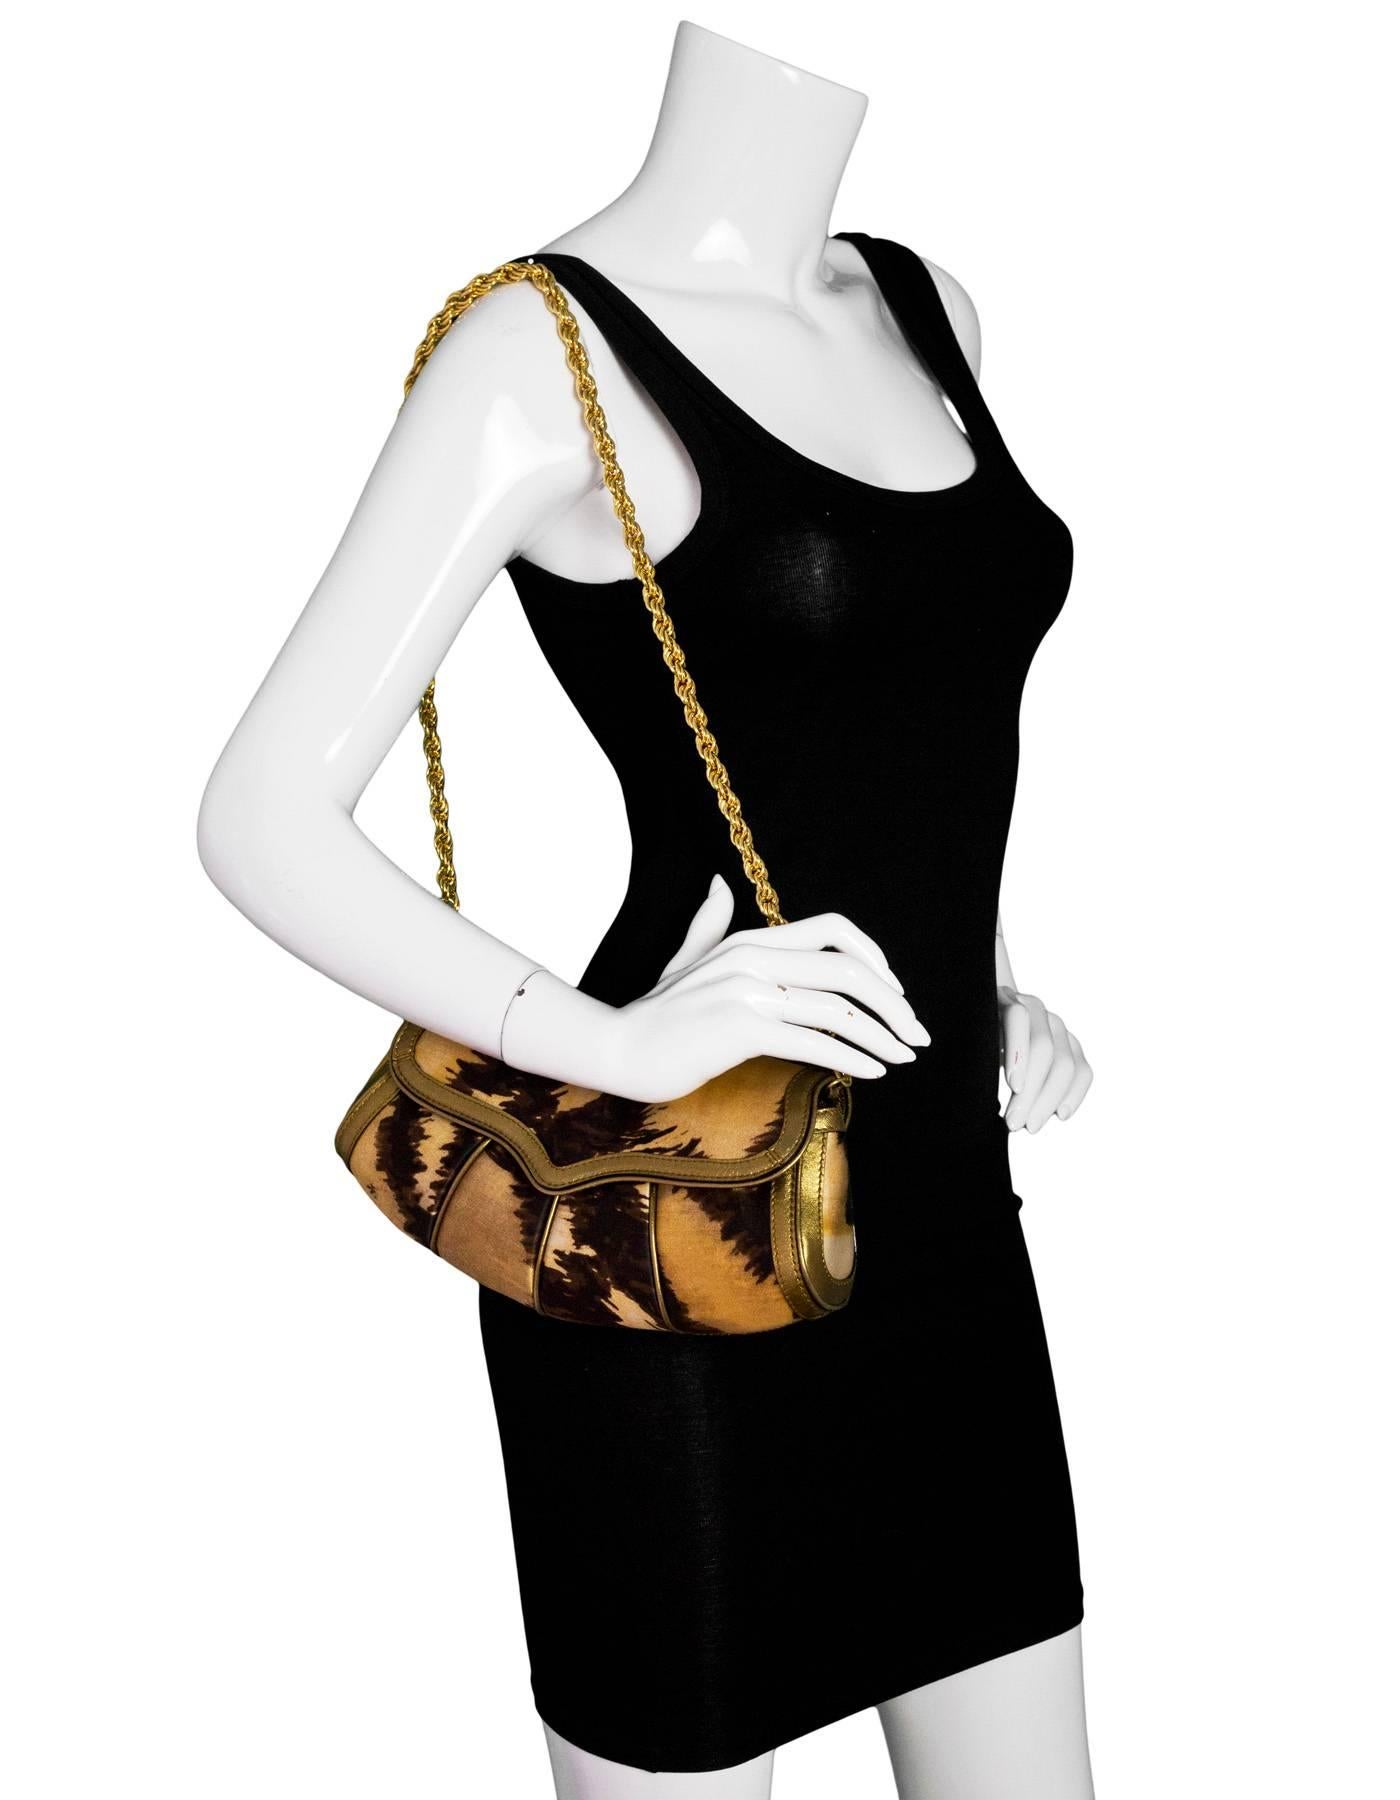 Roberto Cavalli Brown & Gold Satin Evening Clutch/Shoulder Bag

Made In: Italy
Color: Brown, gold
Hardware: Goldtone
Materials: Satin, leather
Lining: Beige textile
Closure/Opening: Flap top with snap closure
Exterior Pockets: None
Interior Pockets: